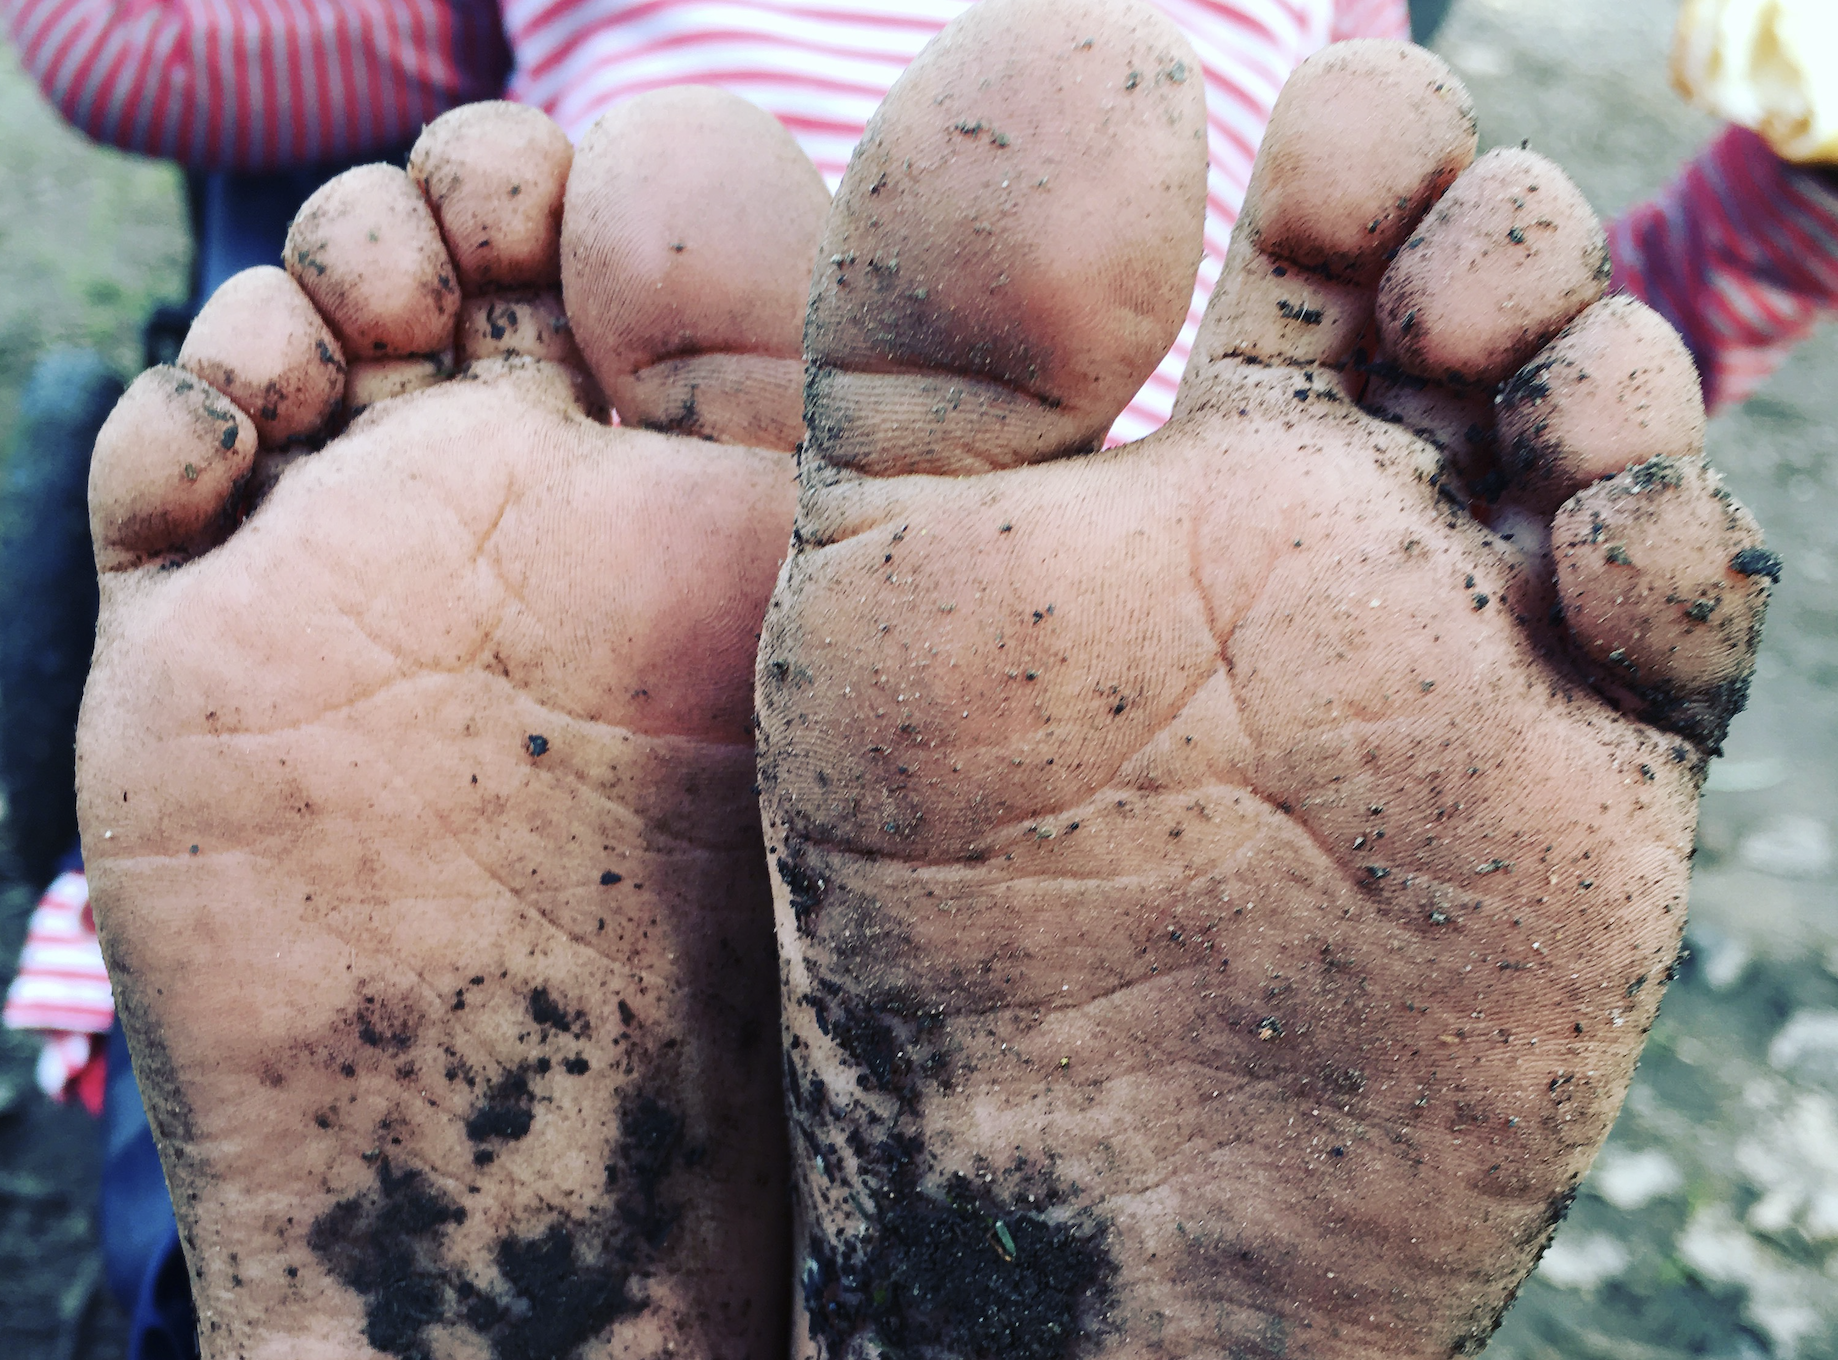 Walking Barefoot on the Earth, Blog